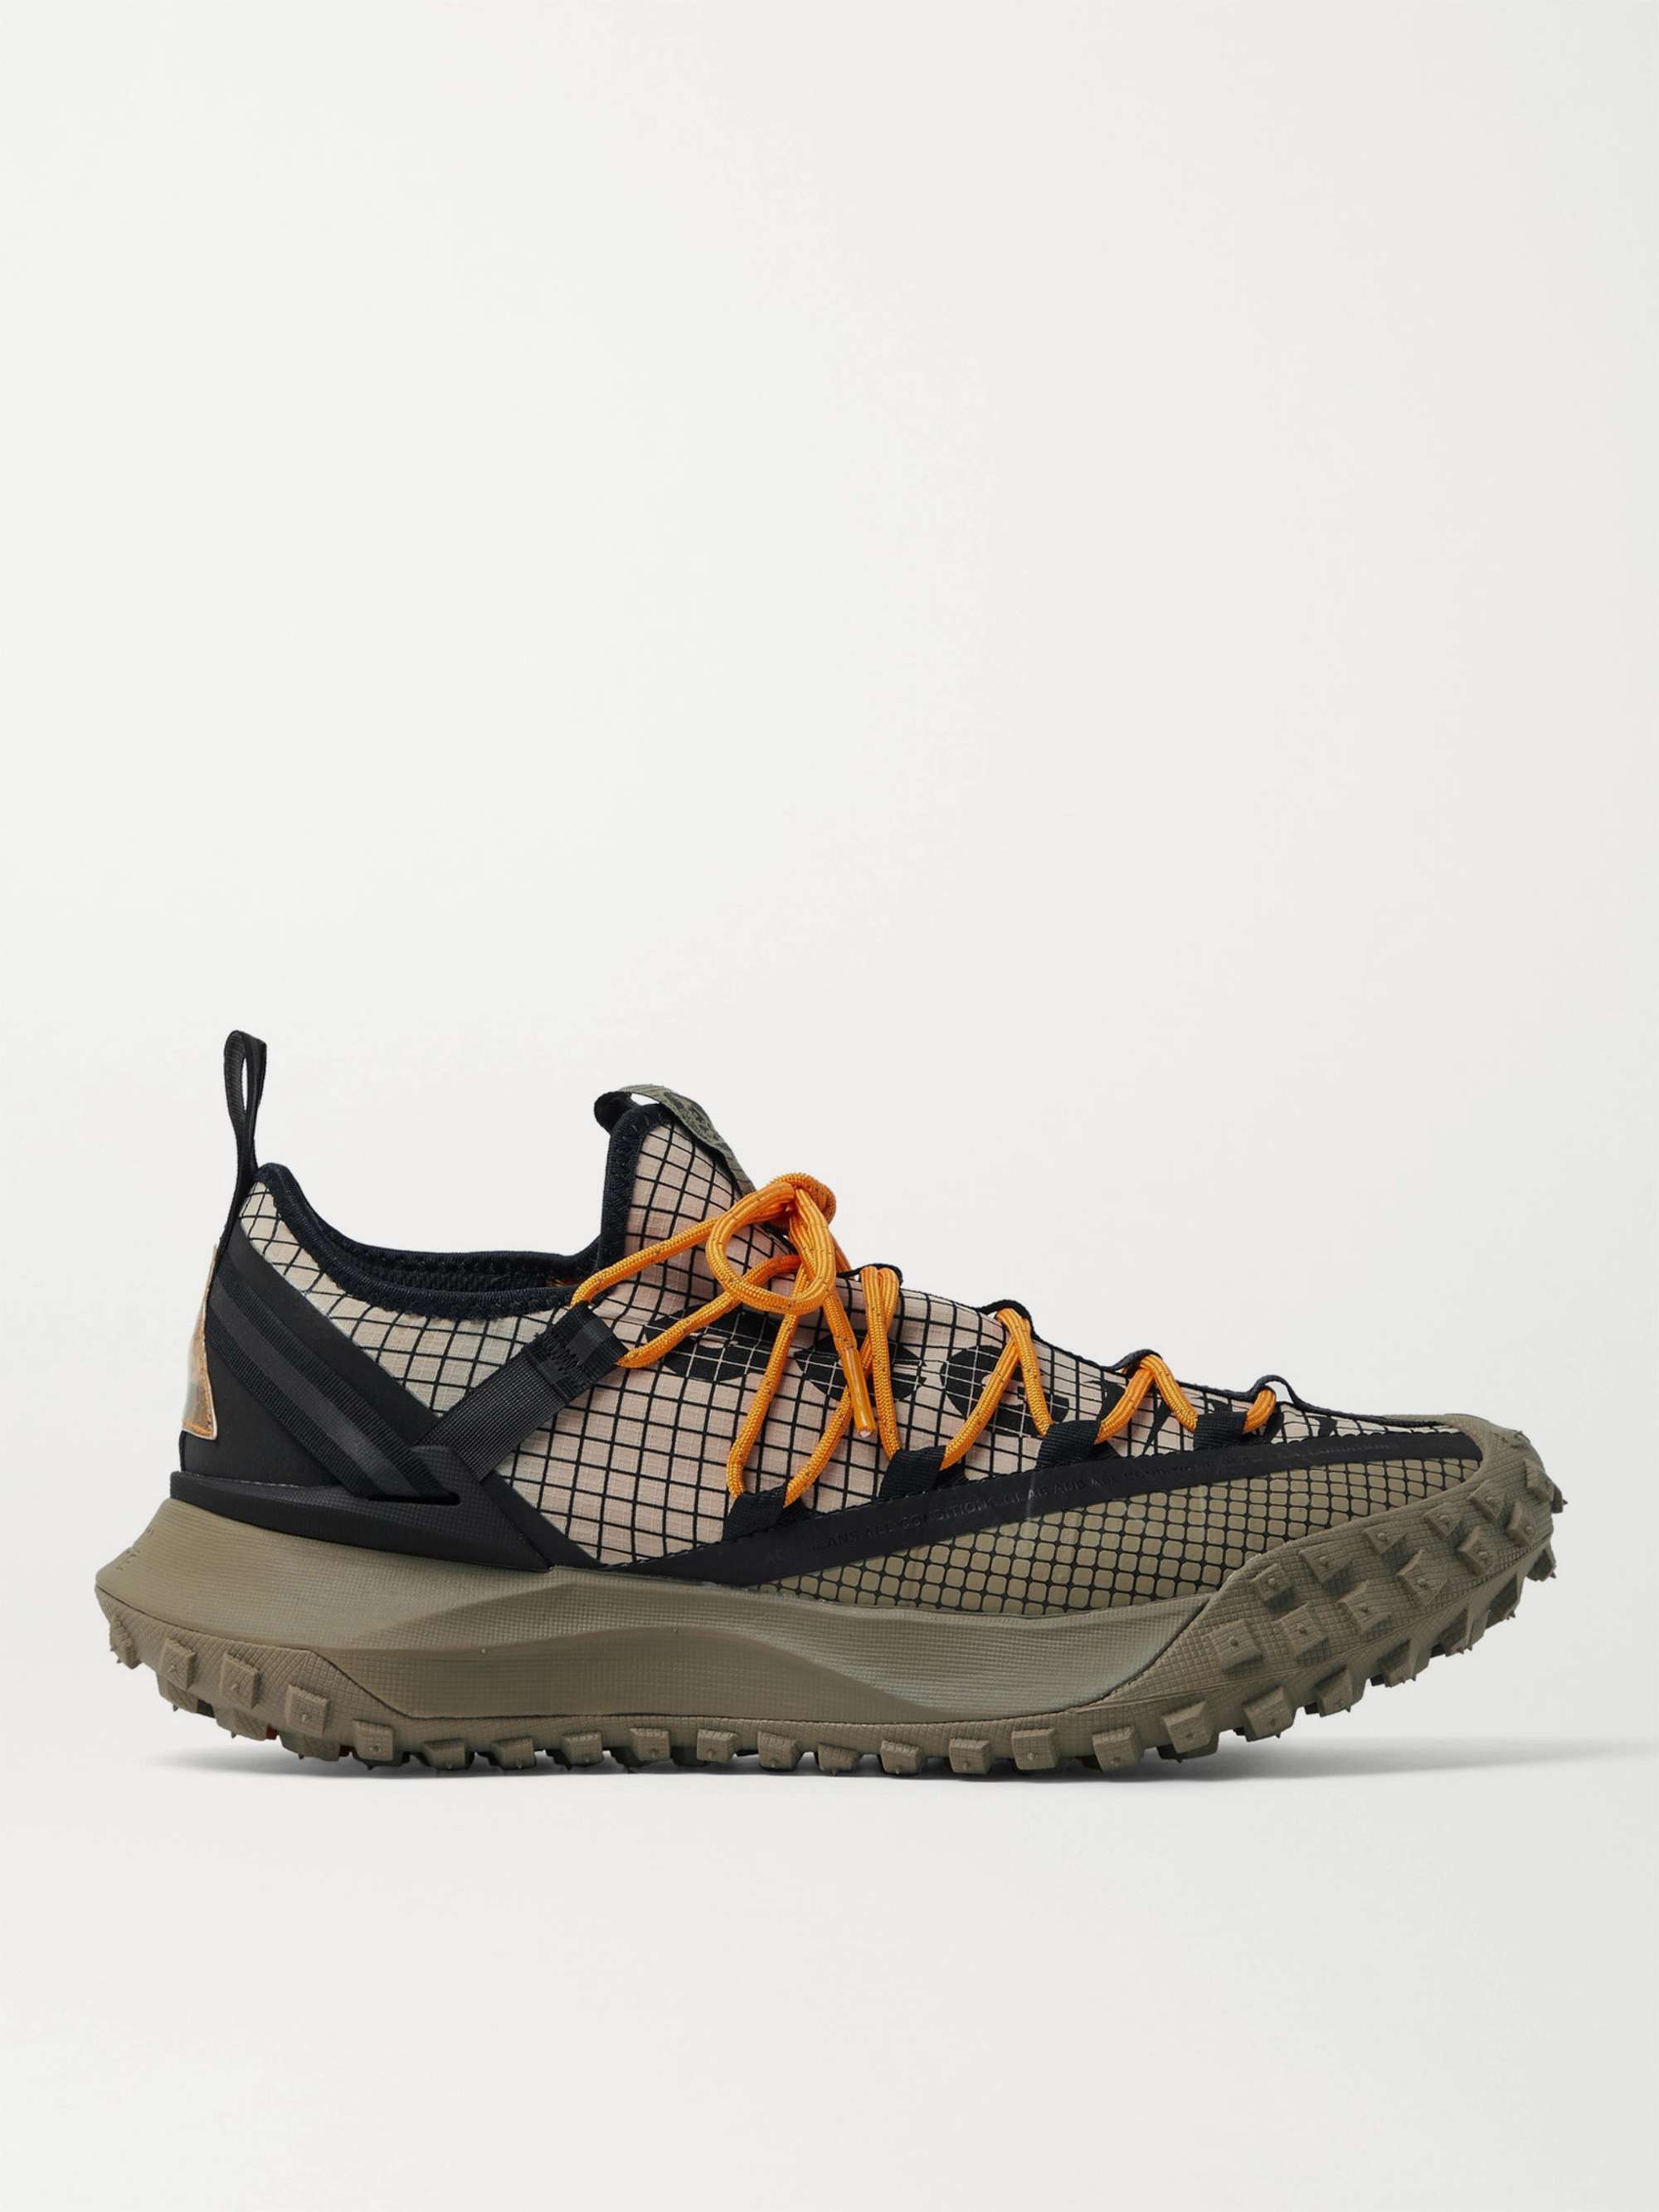 Brown ACG Mountain Fly Rubber-Trimmed GORE-TEX Sneakers | NIKE | MR PORTER